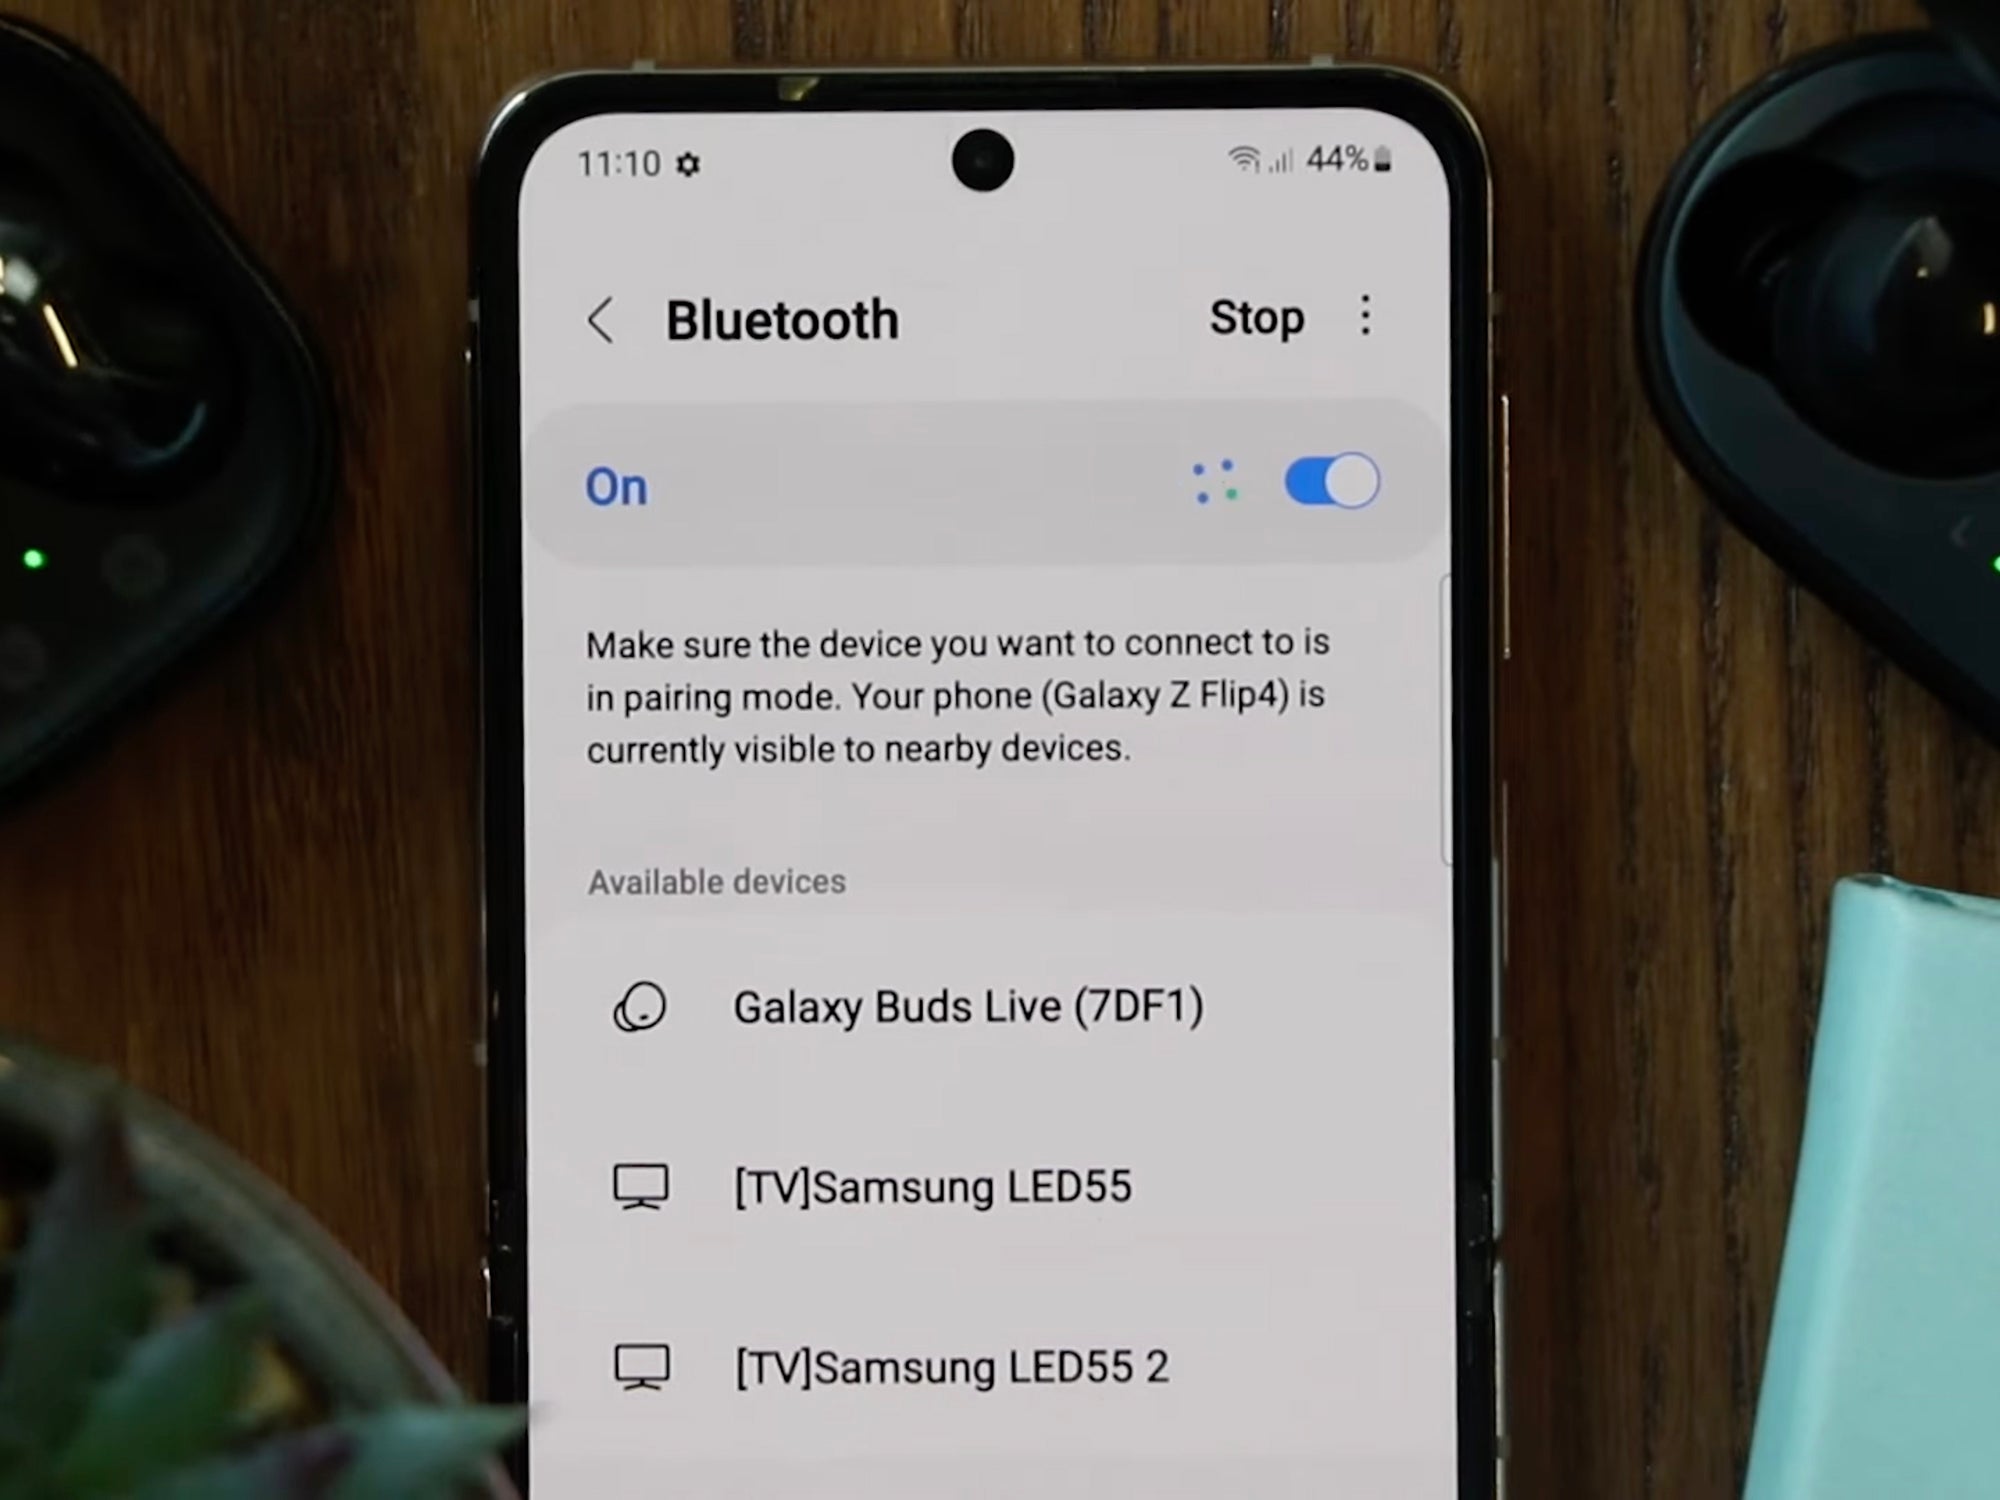 A Samsung phone with Galaxy Buds and two Samsung TVs appearing in its Bluetooth settings.